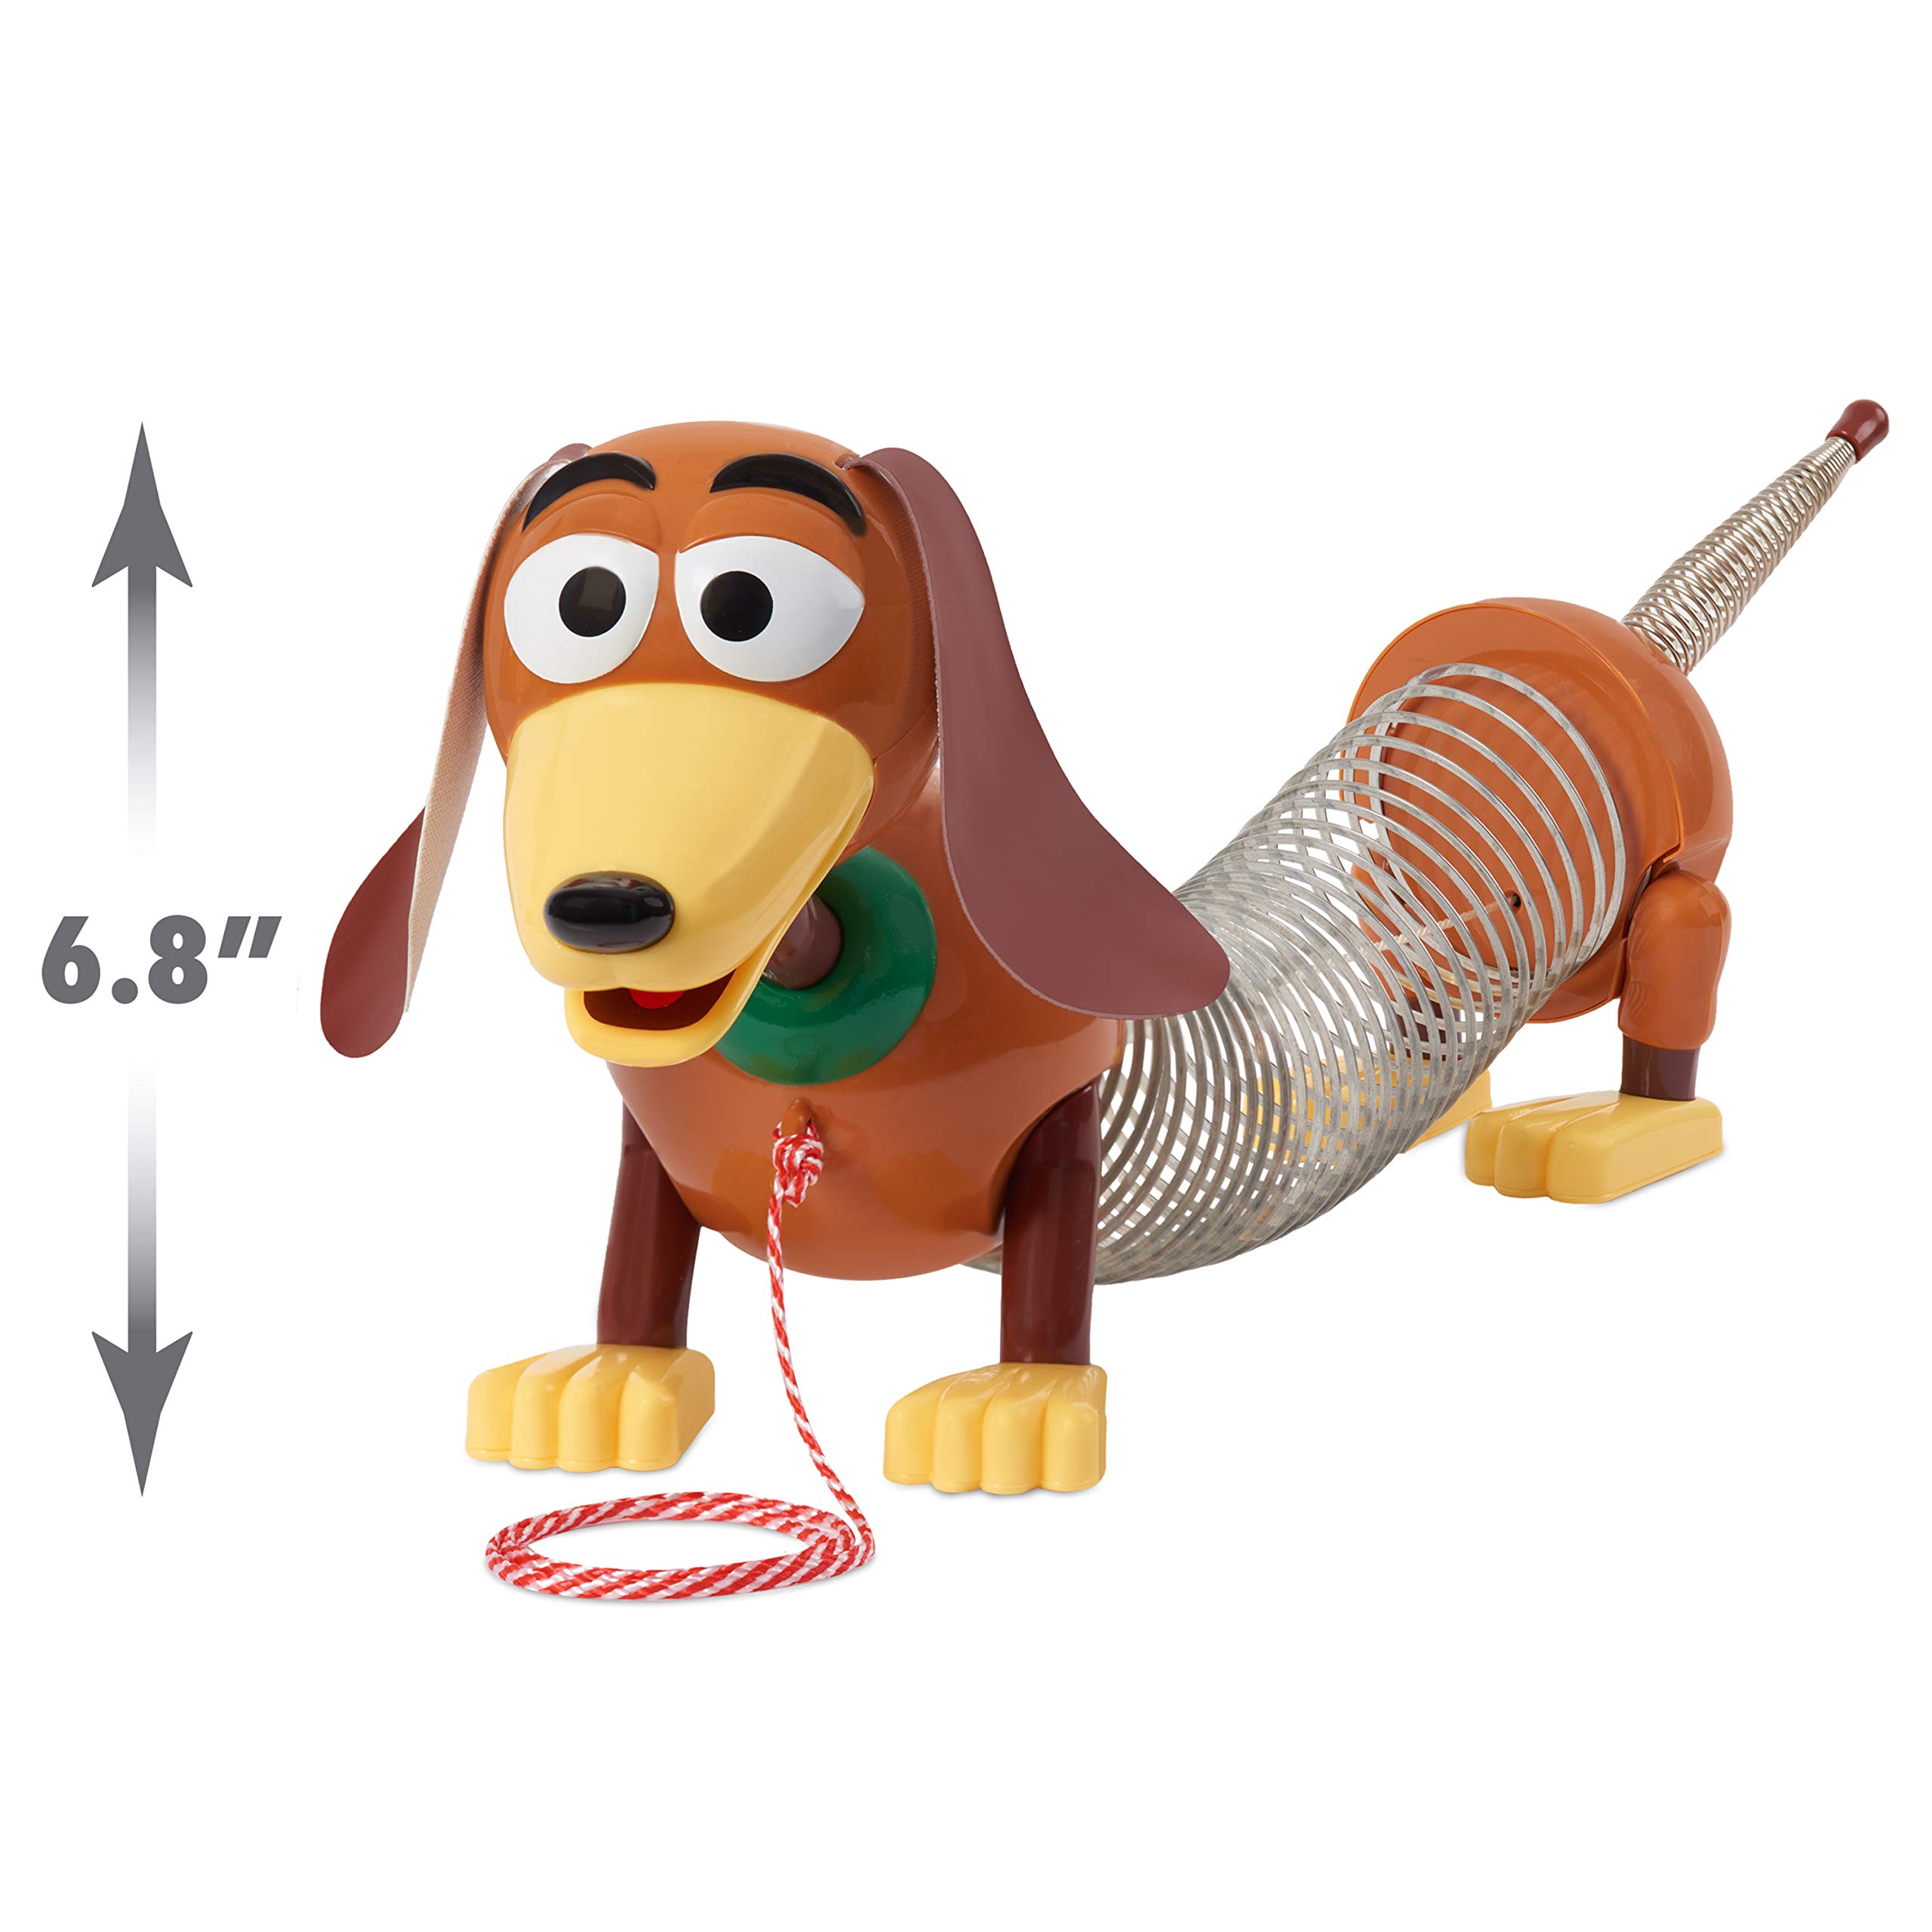 Retro Slinky Dog, The Original Walking Spring Toy, Vintage Spring Toys, Stretches to 14 Inches Long, by Just Play, Multicolor